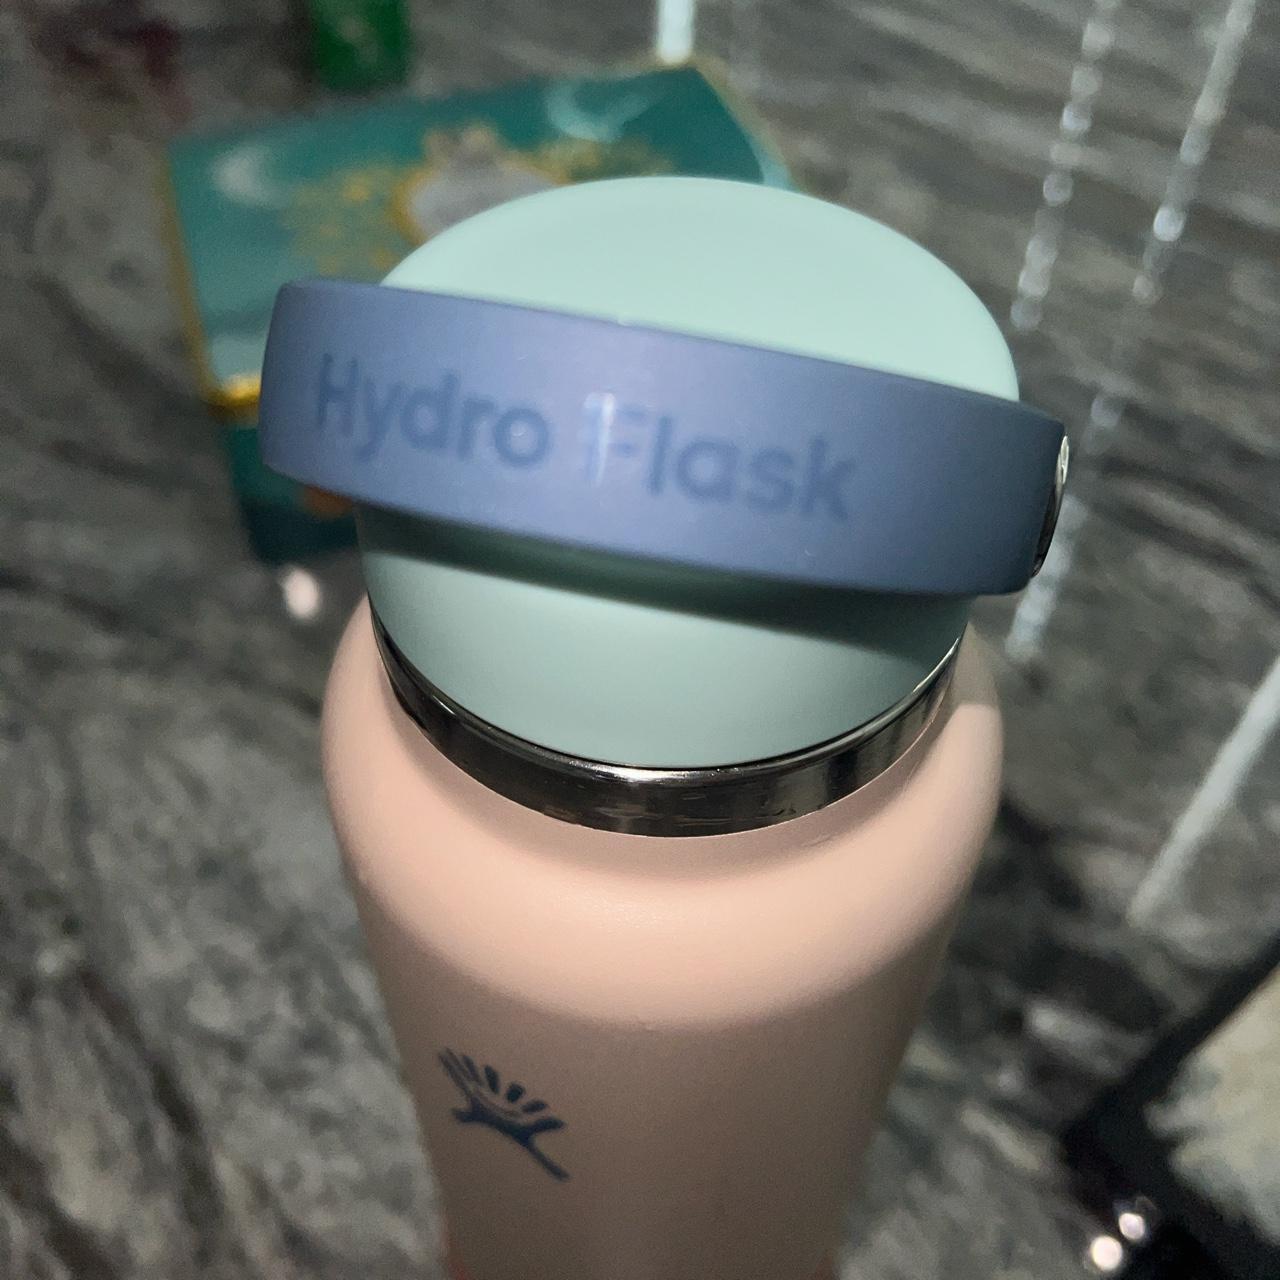 i'm obsessed with this color #hydroflask #newhydroflask